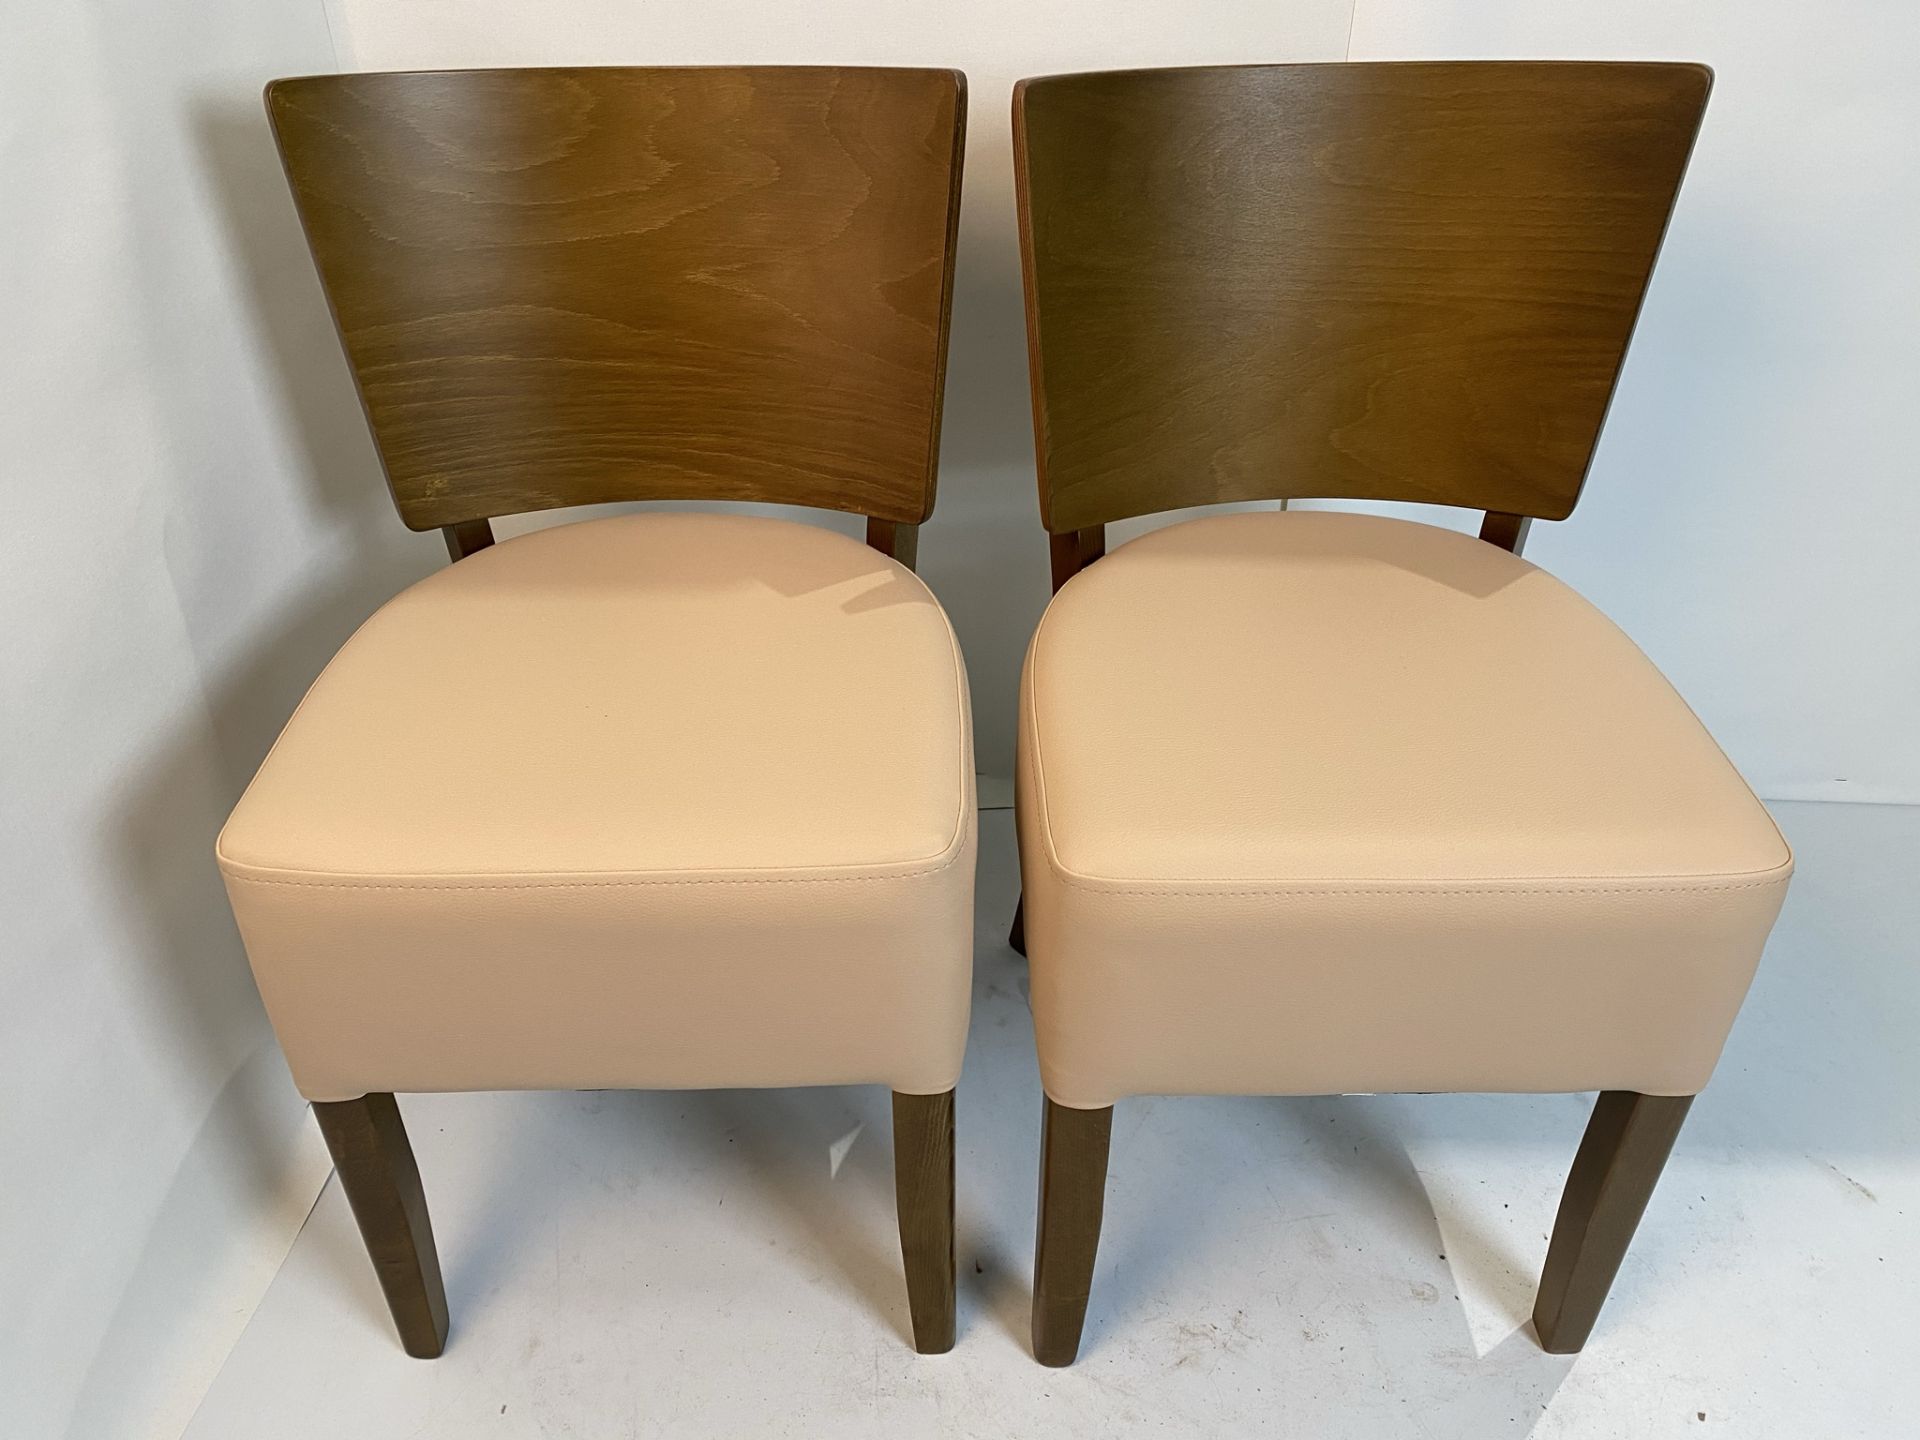 2 x Rebecca Vena BE-10 dining/side chairs with B.